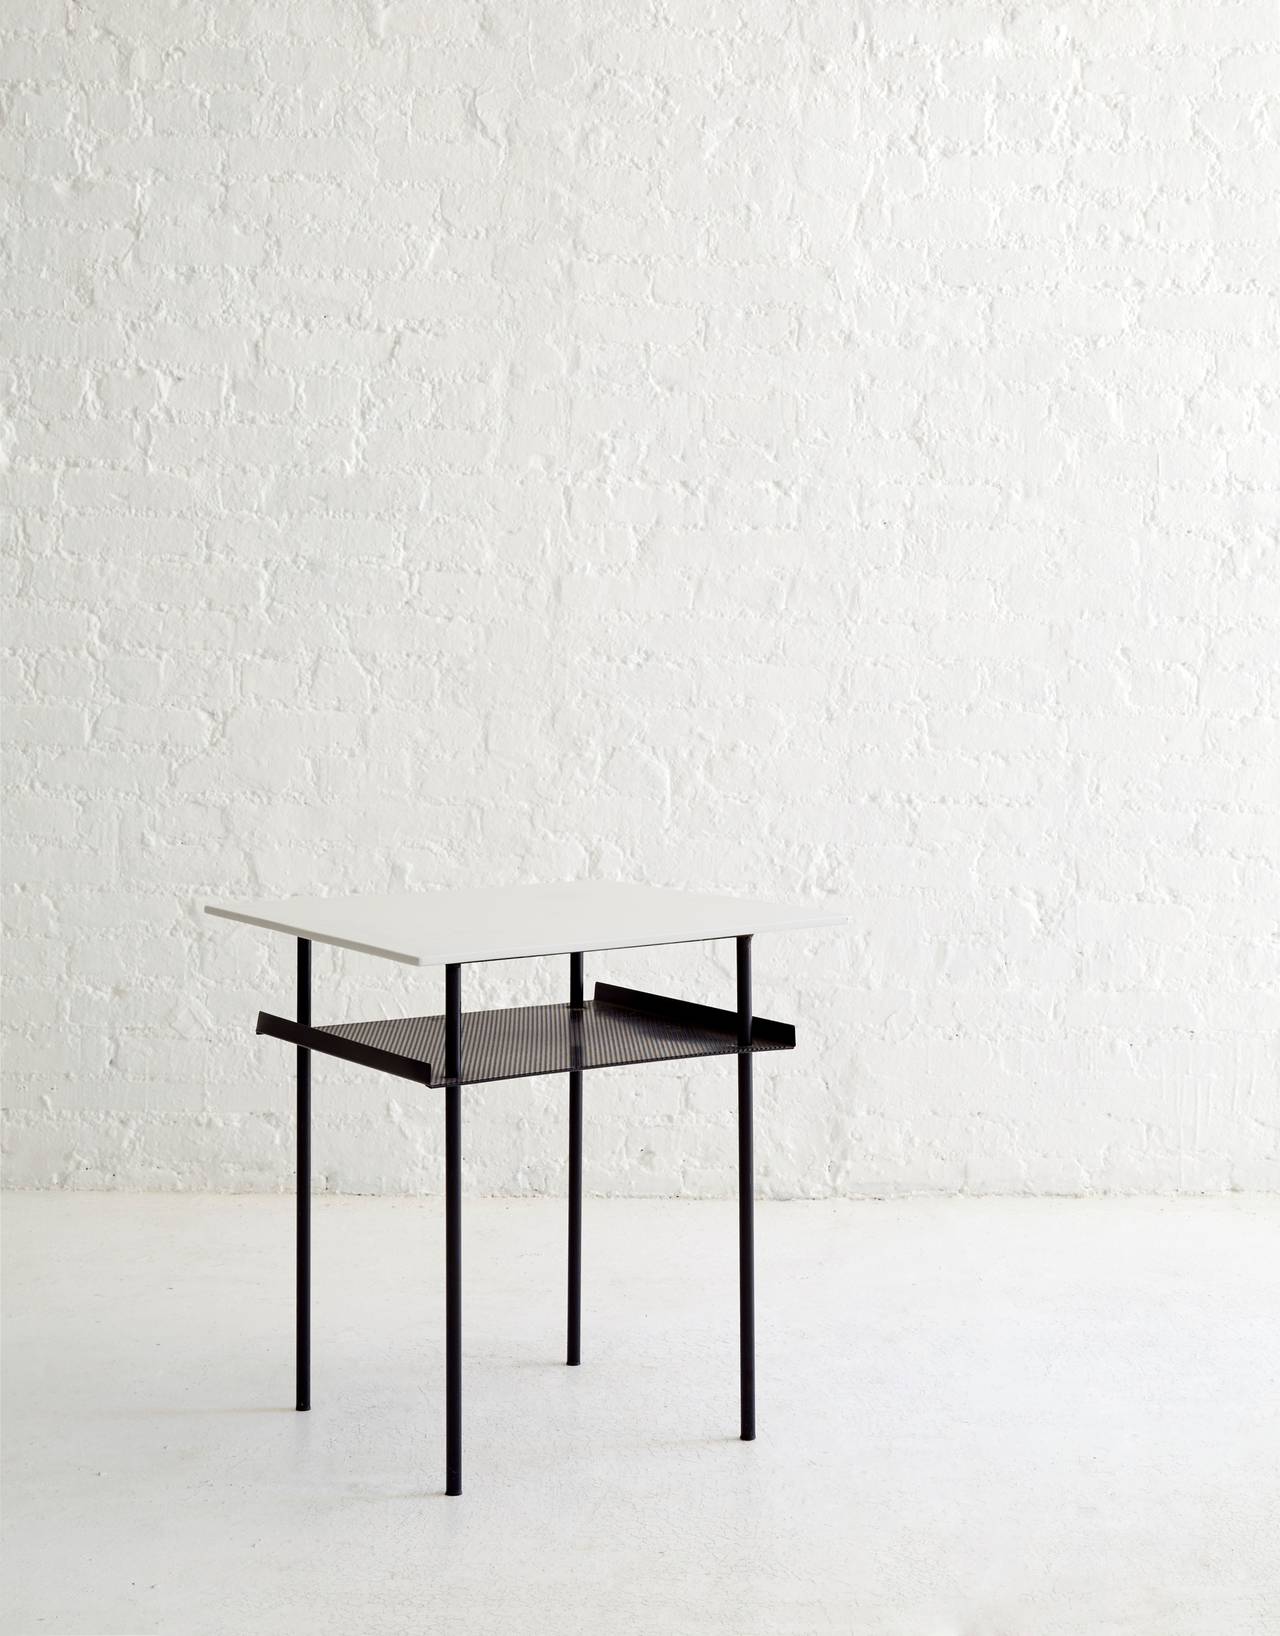 Wim Rietveld side table for Auping with a rare perforated metal shelf.